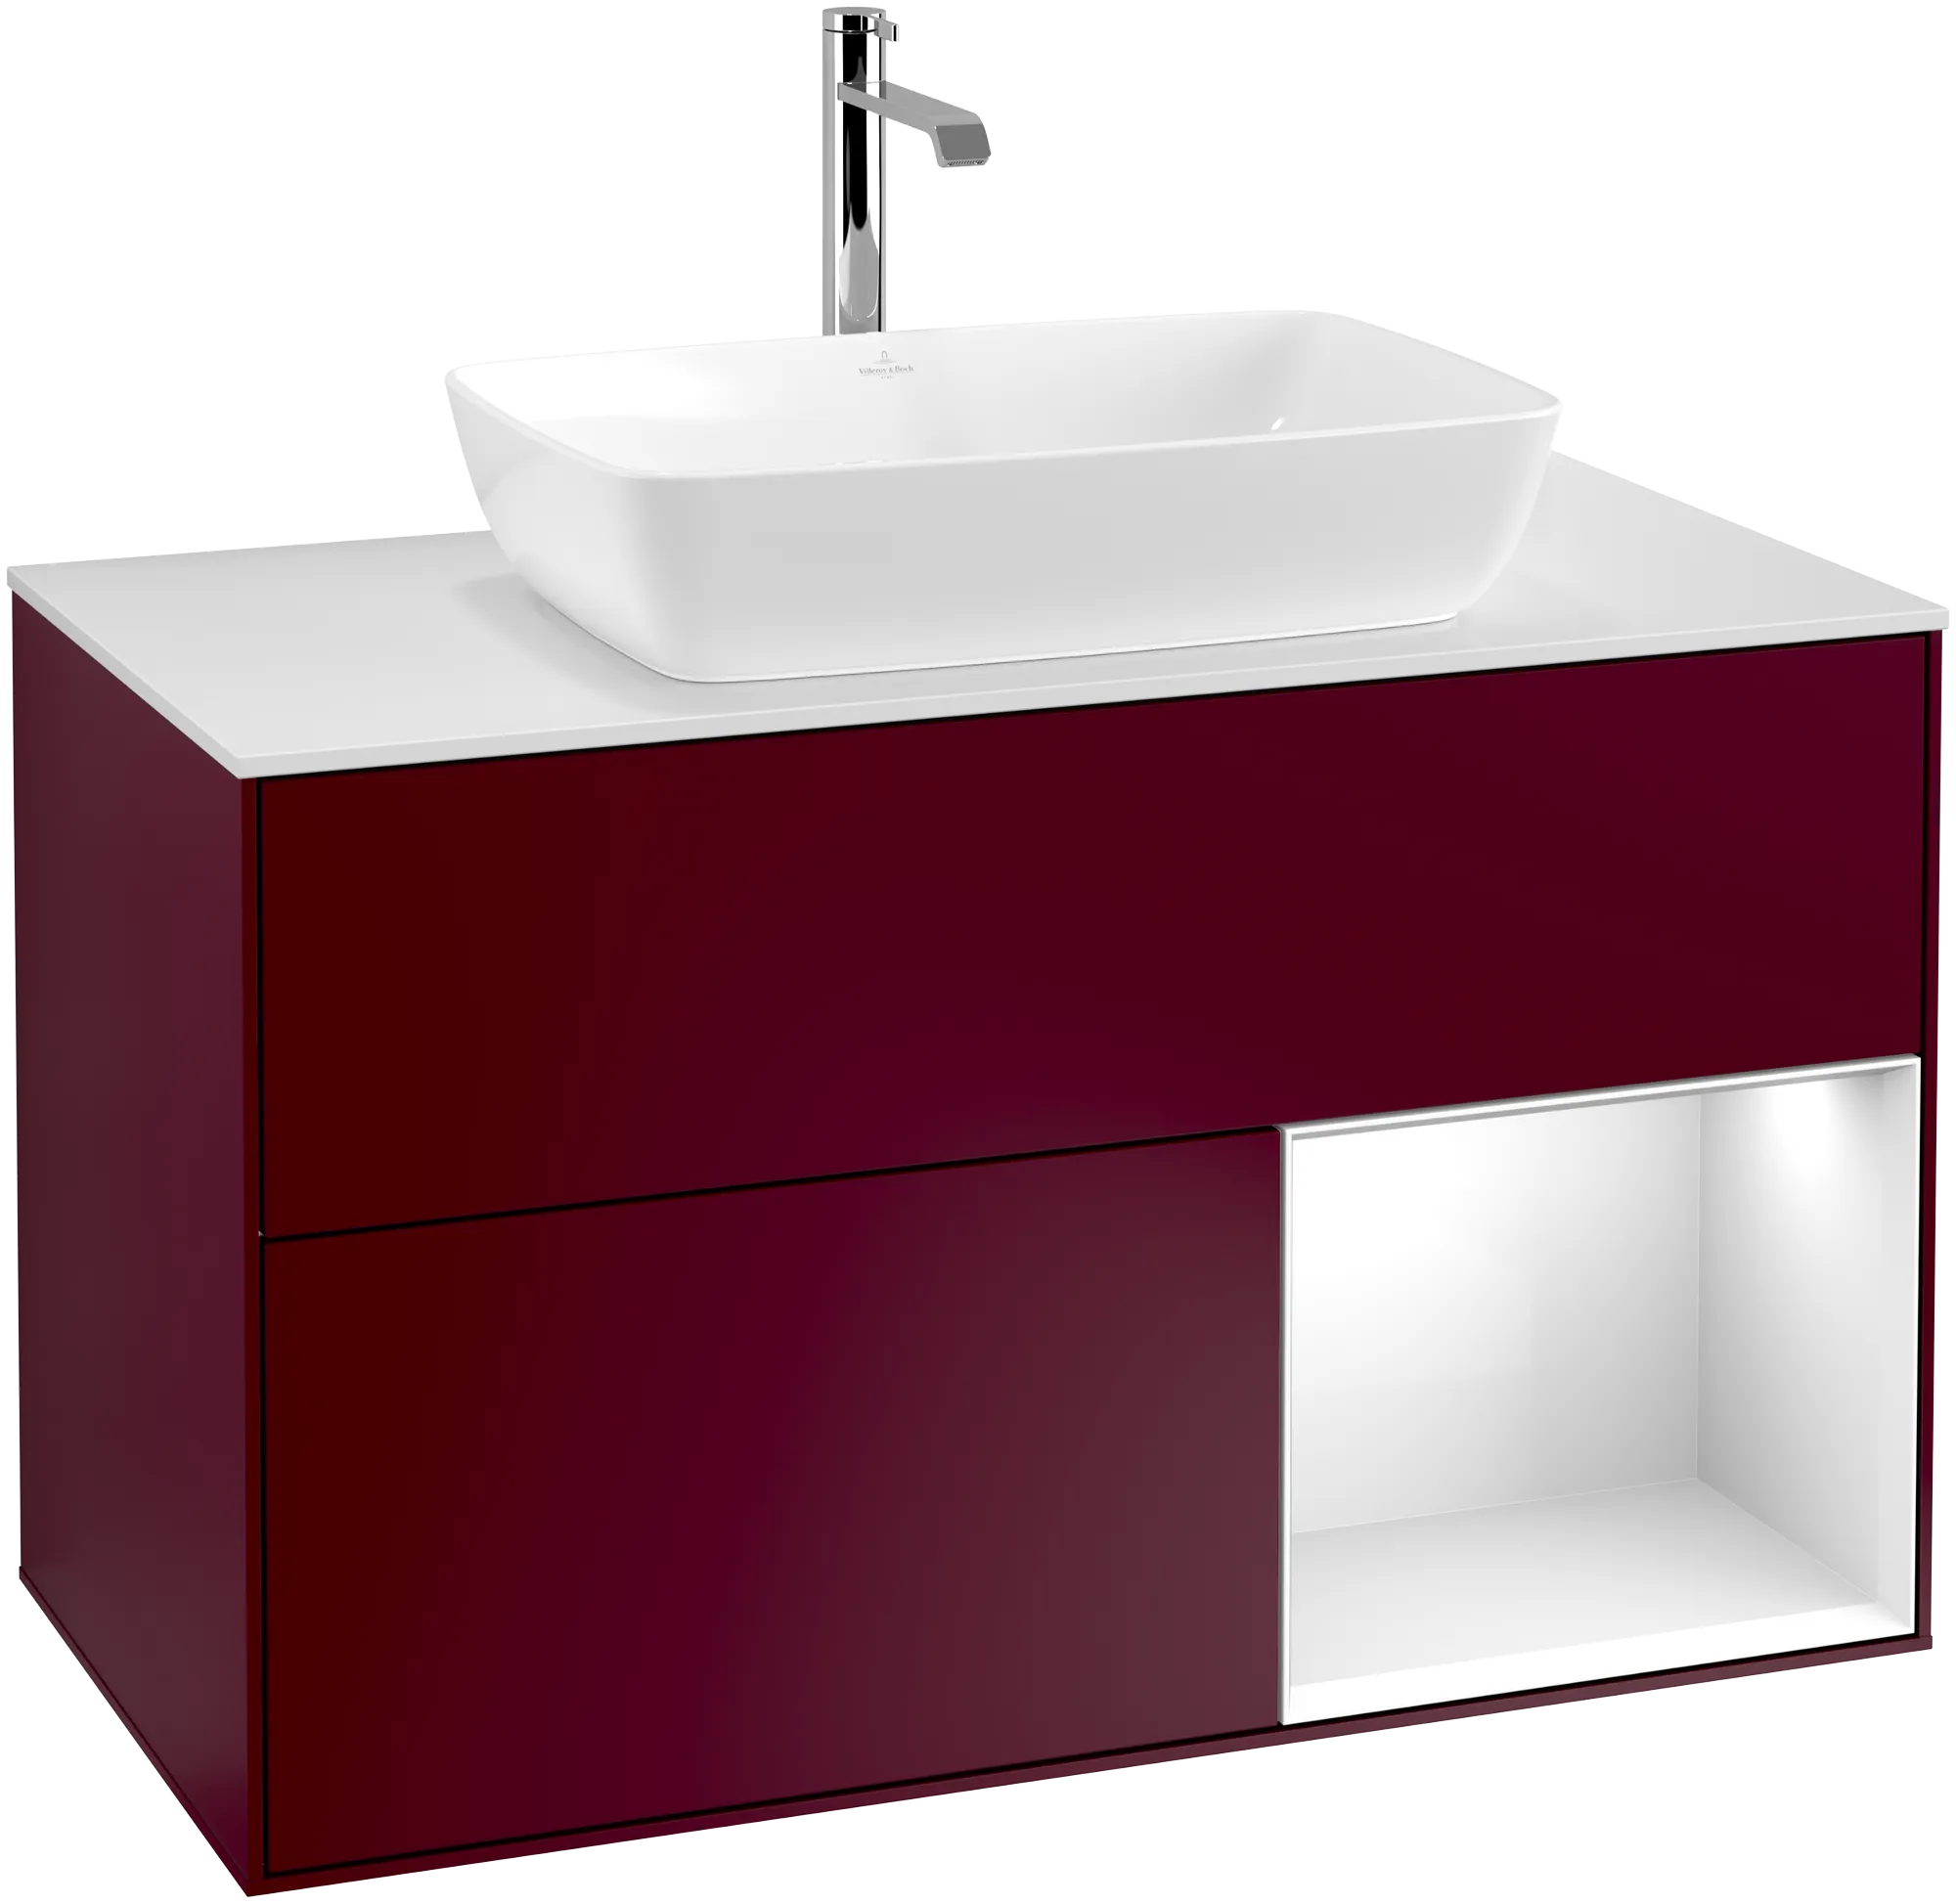 Зображення з  VILLEROY BOCH Finion Vanity unit, with lighting, 2 pull-out compartments, 1000 x 603 x 501 mm, Peony Matt Lacquer / Glossy White Lacquer / Glass White Matt #G781GFHB